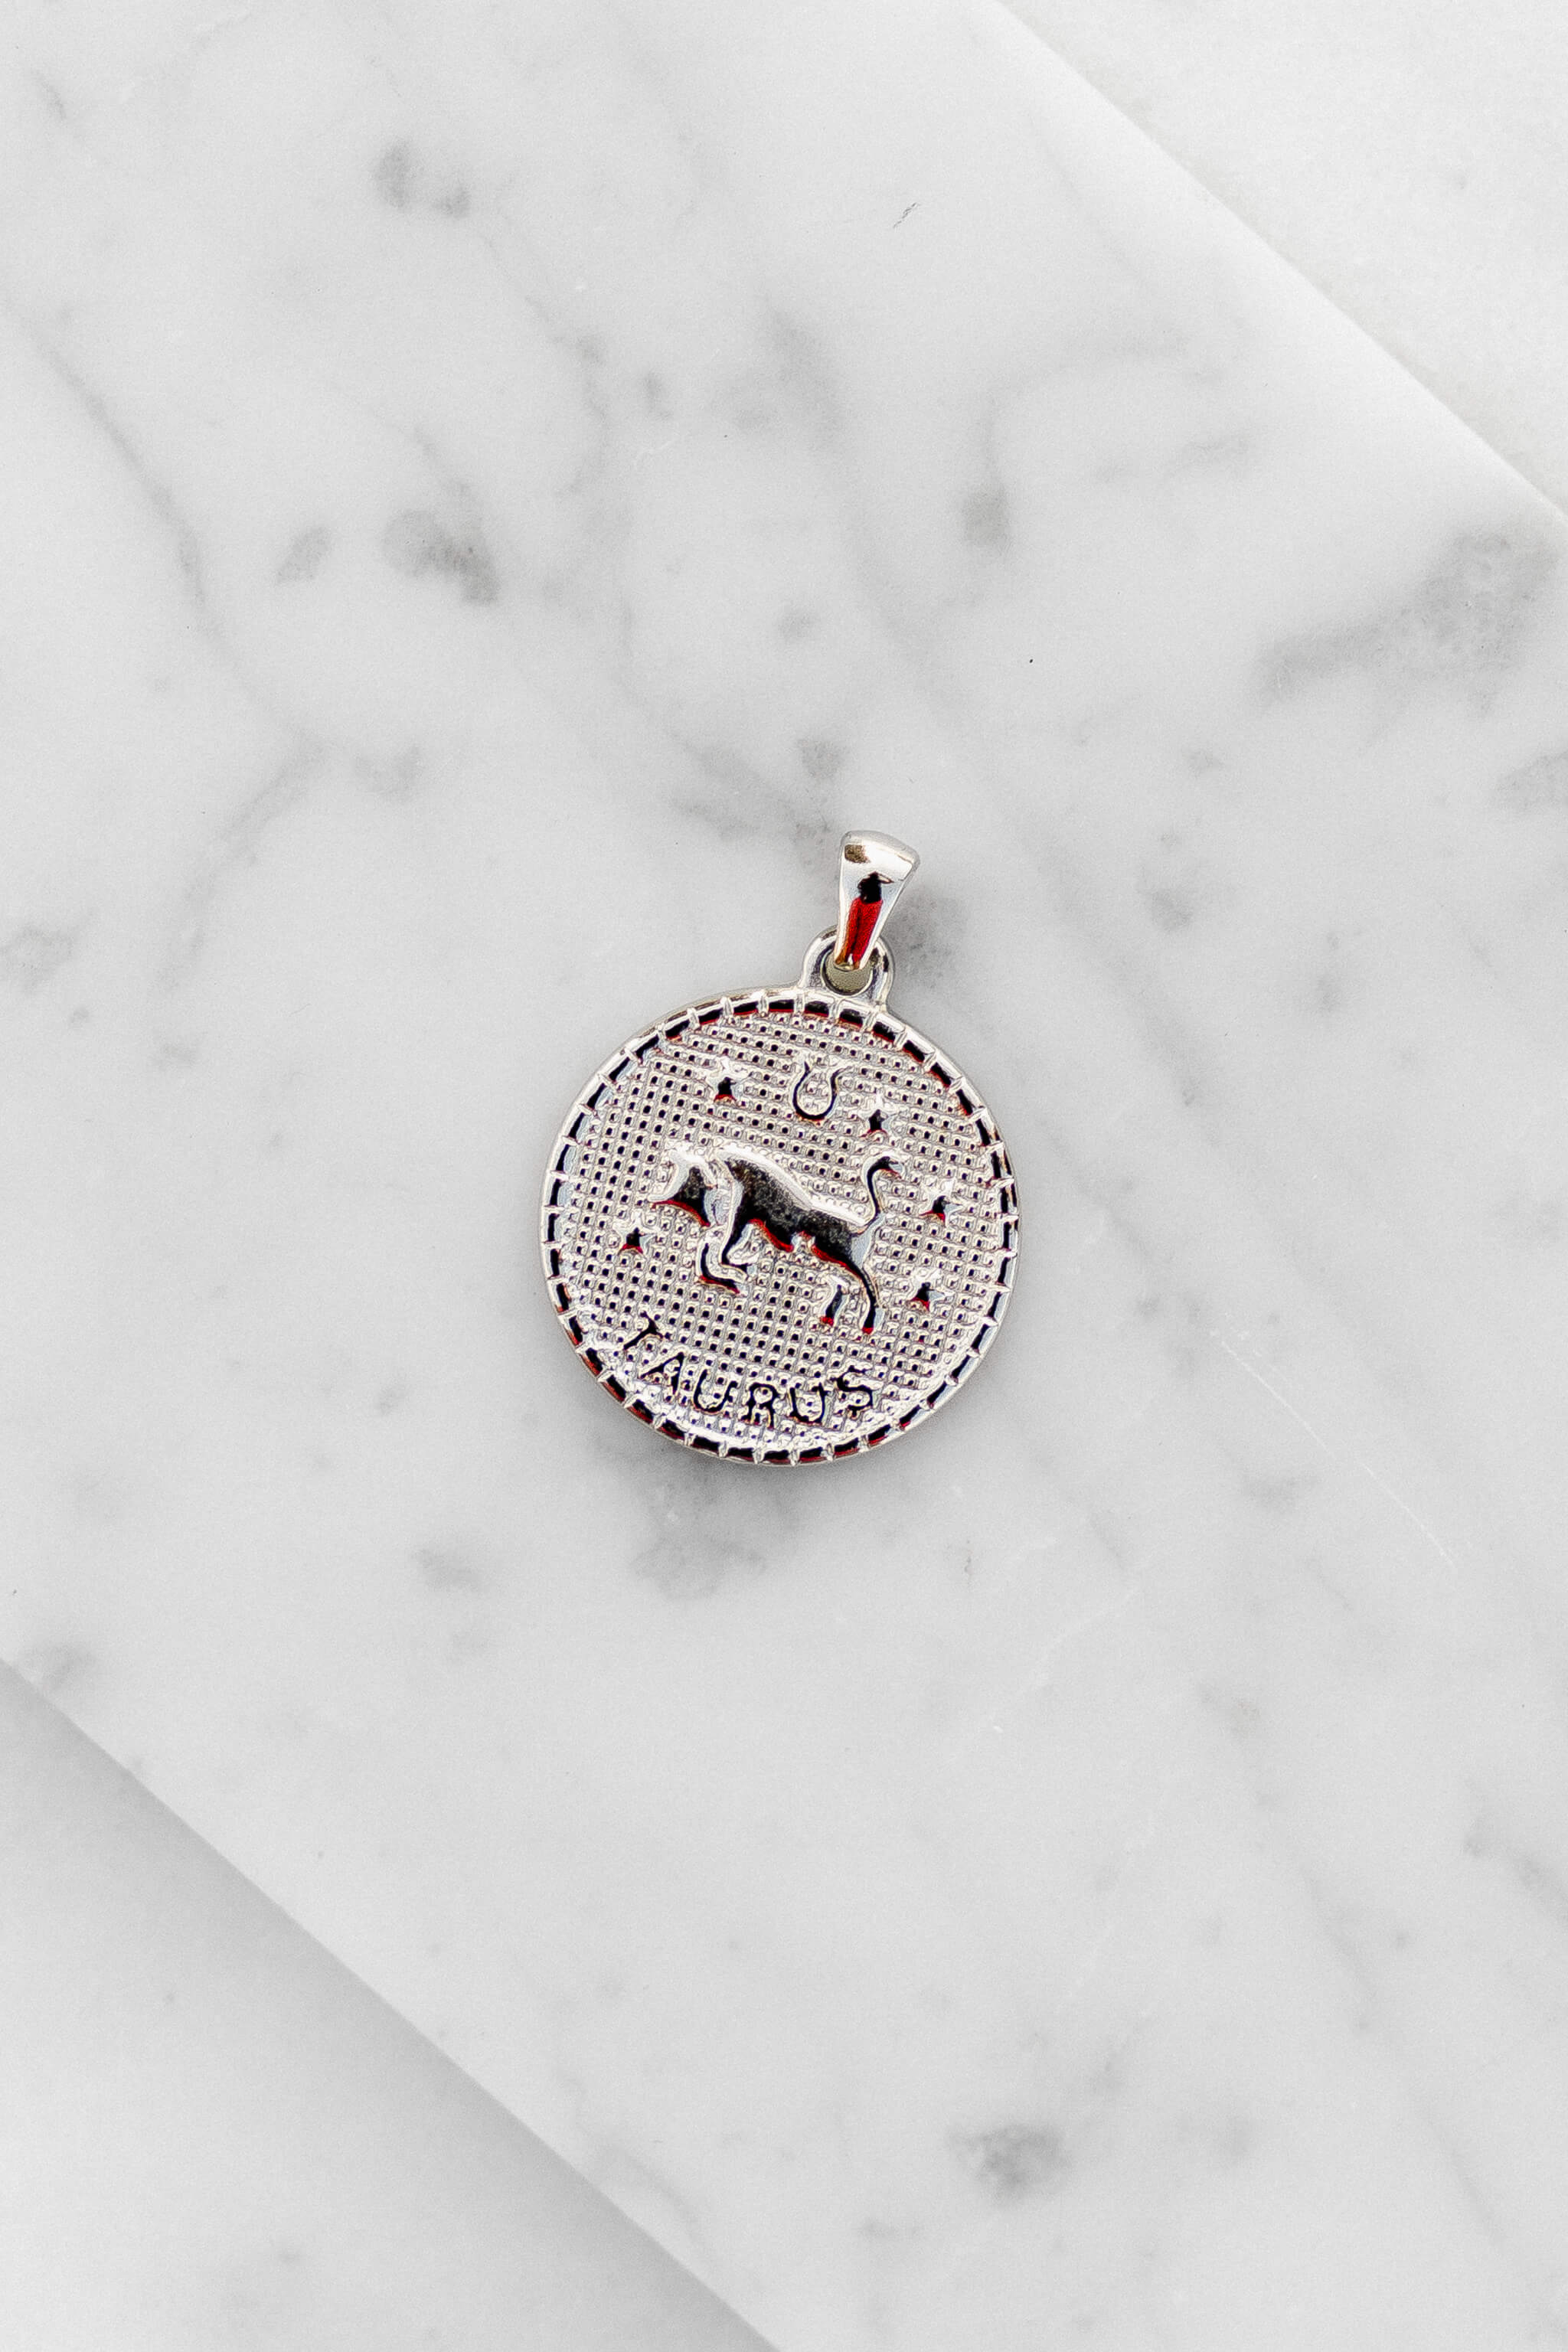 Taurus zodiac sign silver coin charm laying on a white marble